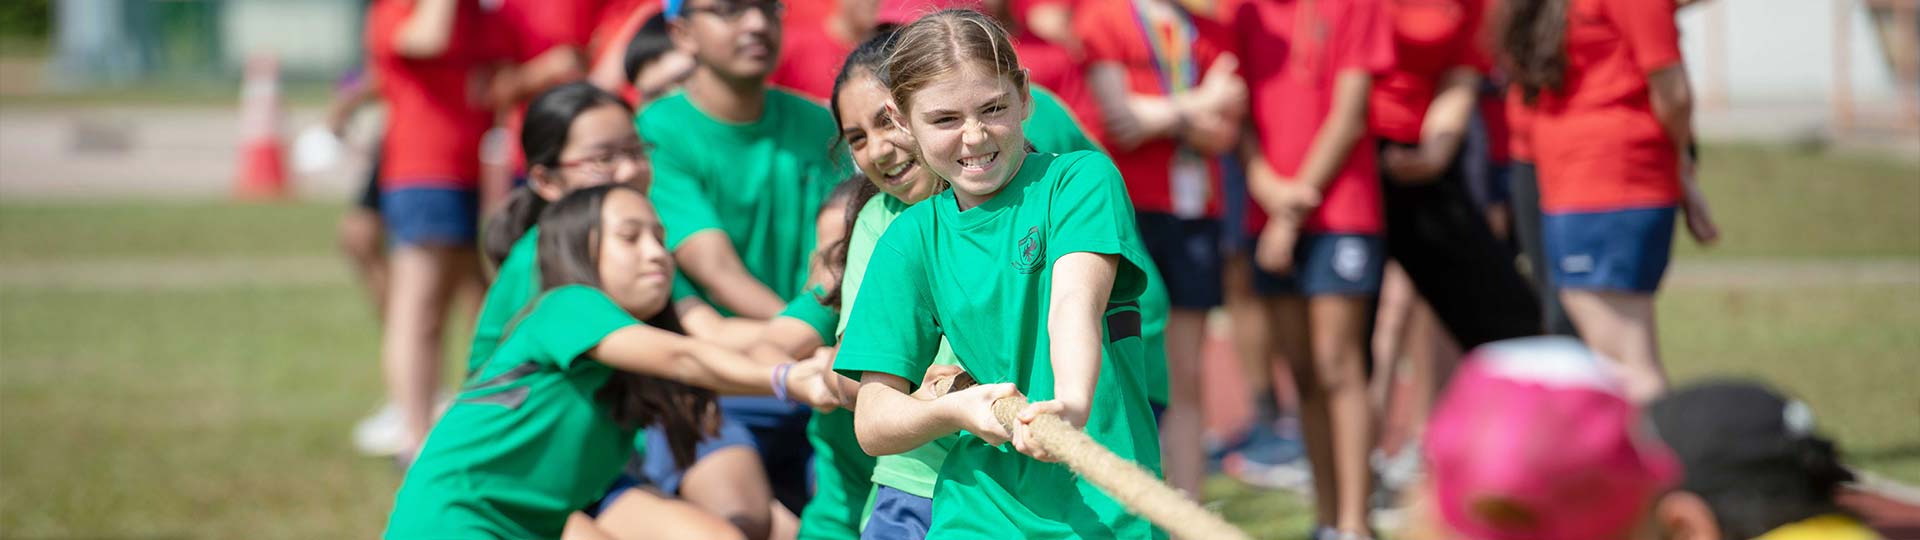 As an international school in Singapore, students from all backgrounds participate in activities together